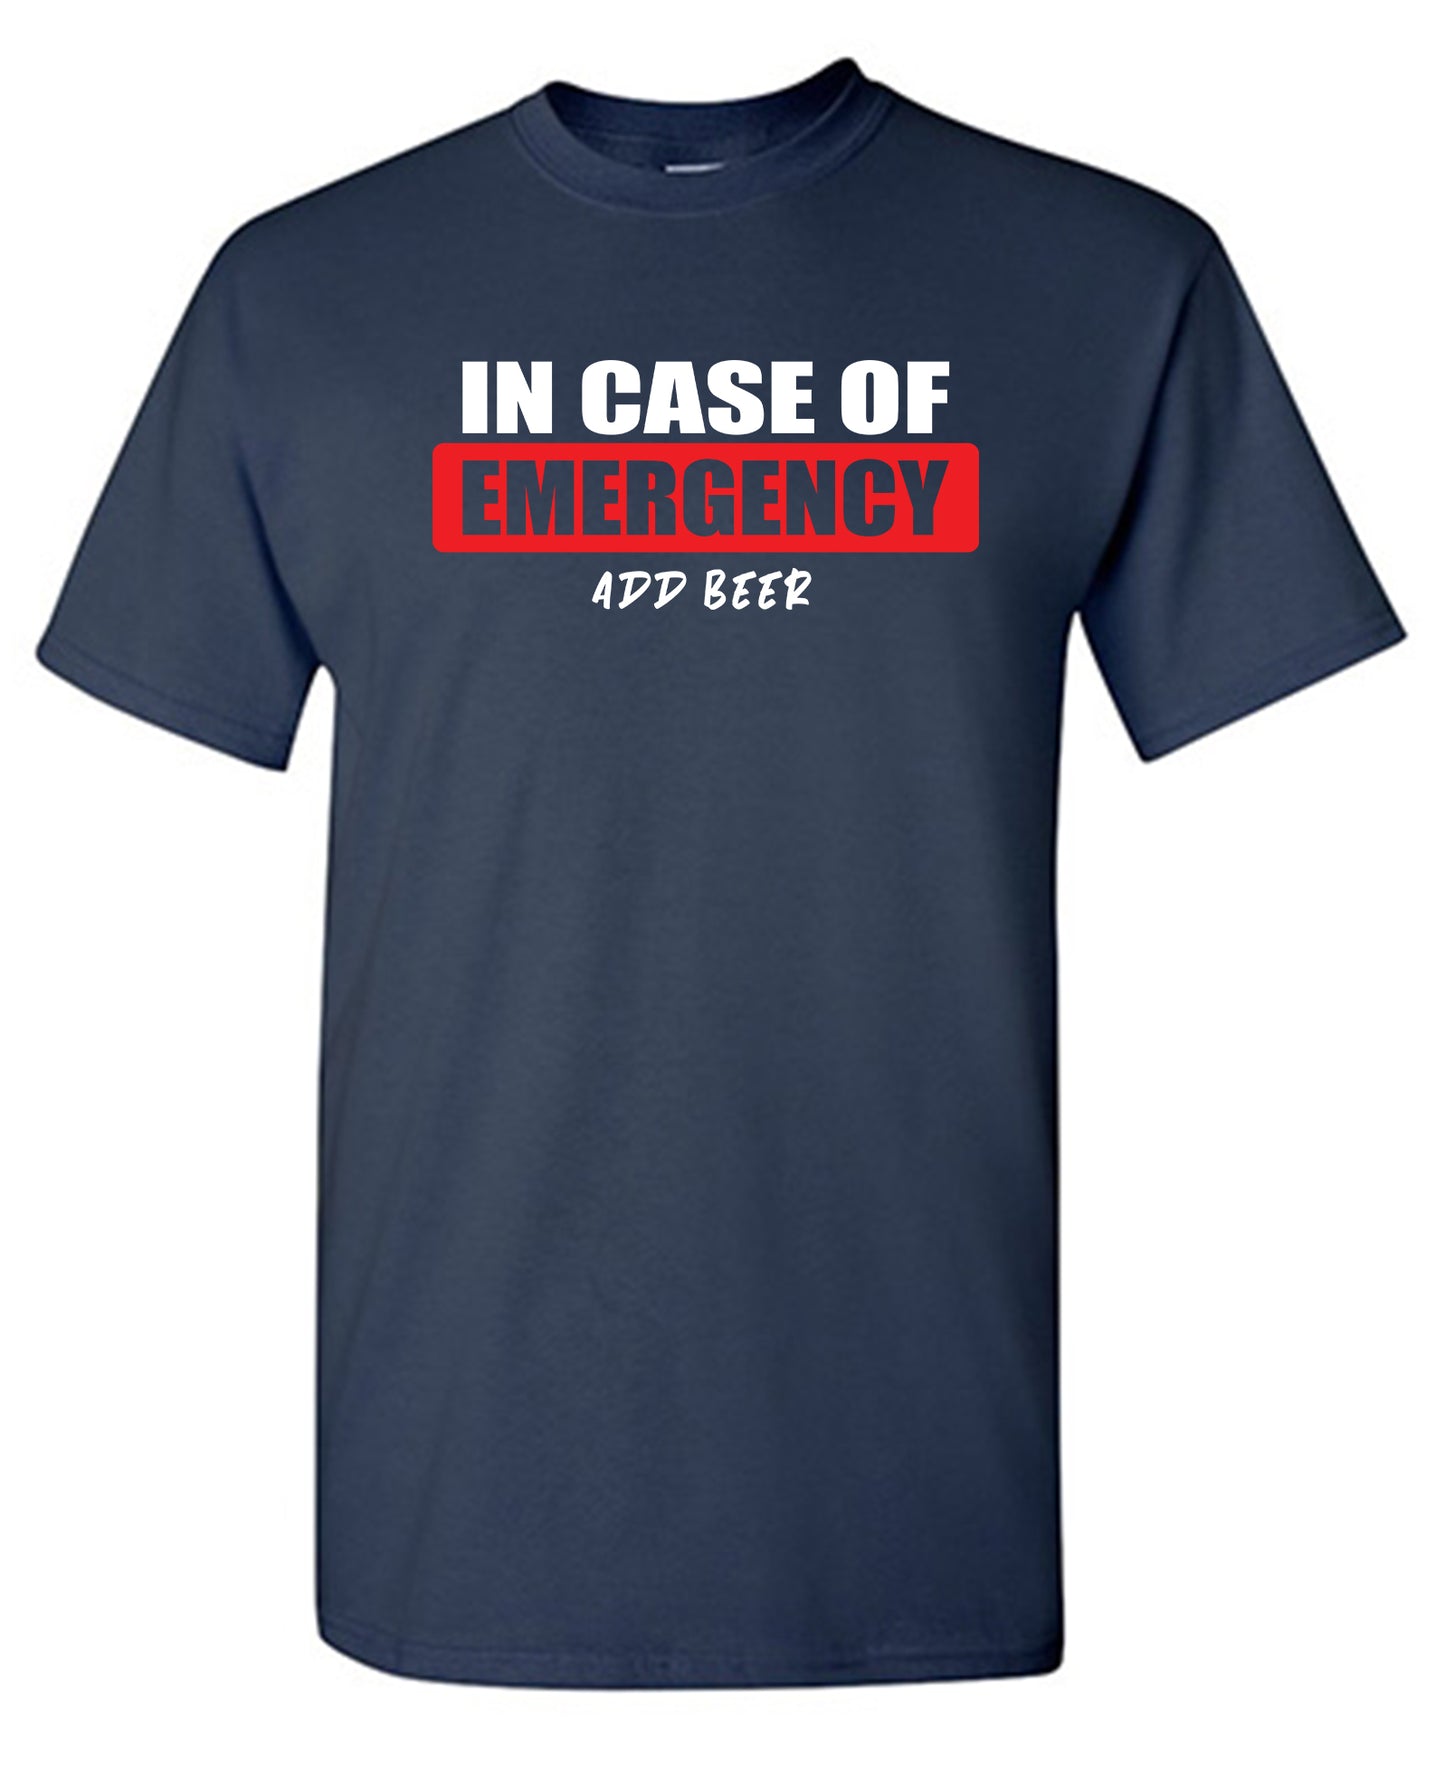 In Case of Emergency, Add Beer - Funny T Shirts & Graphic Tees